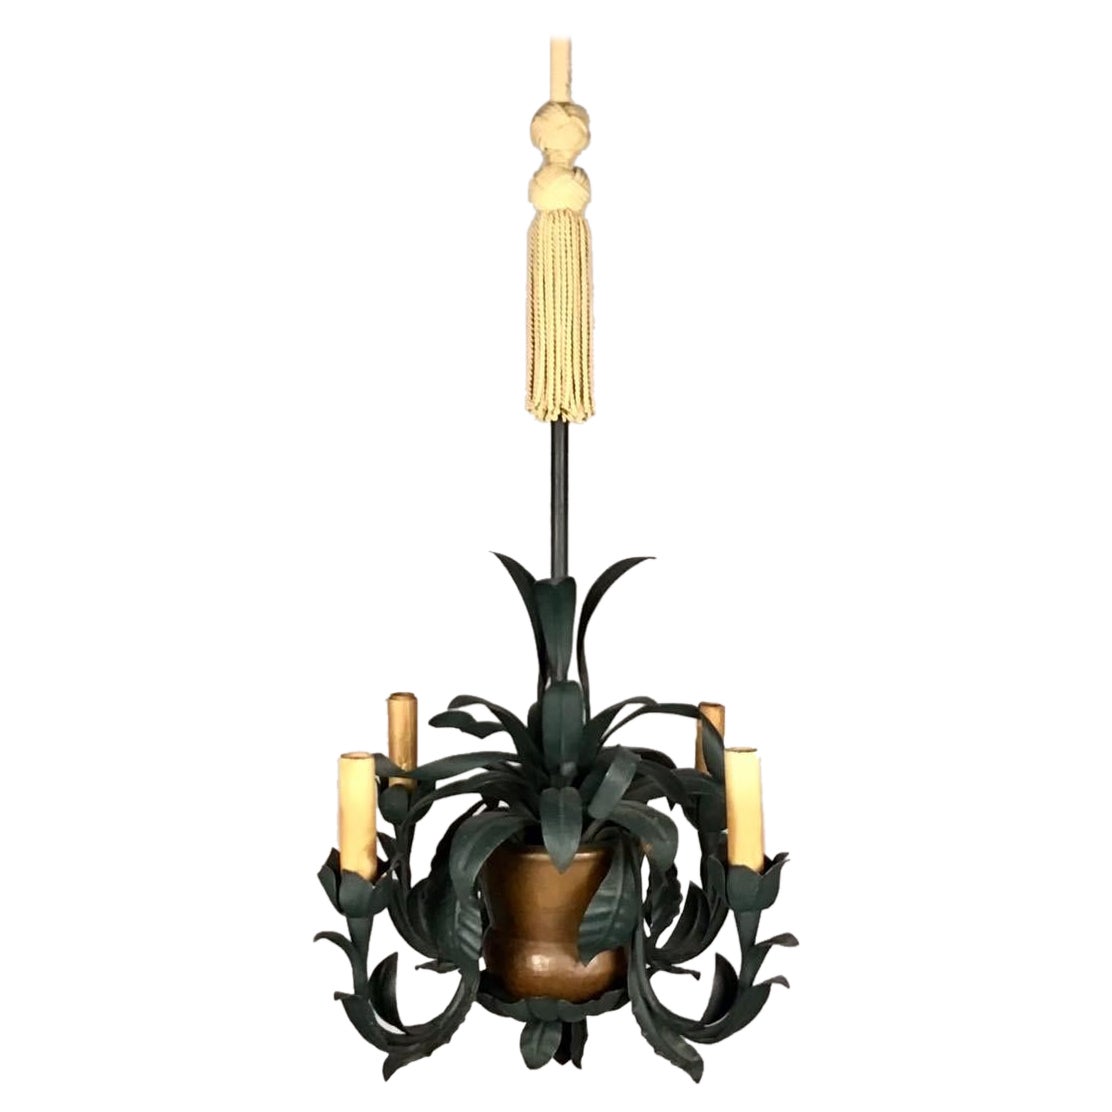 Hollywood Regency Tole and Copper Palm Tree Chandelier